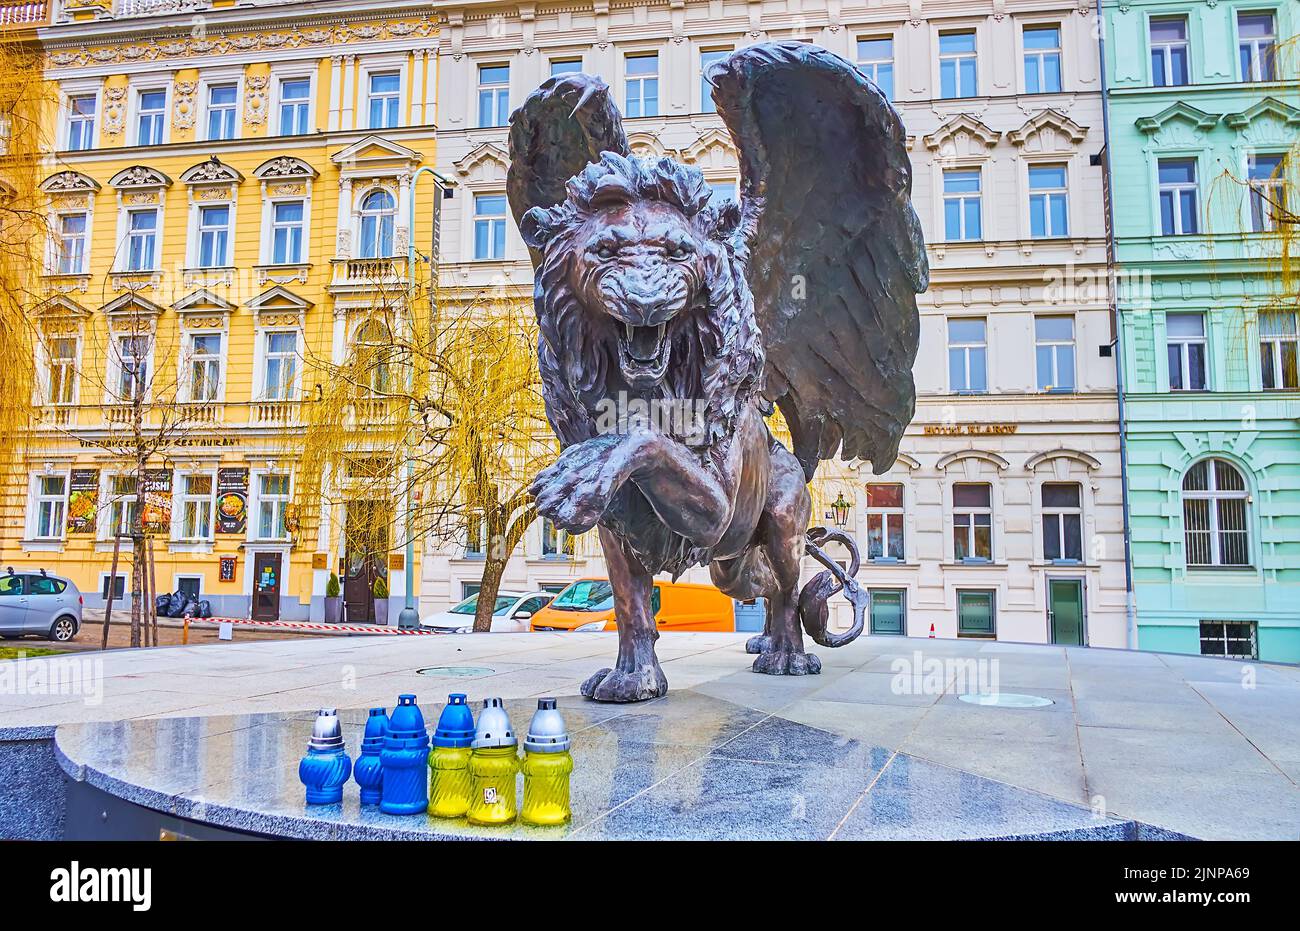 PRAGUE, CZECH REPUBLIC - MARCH 6, 2022: The Winged Lion Monument is one of the landmarks of Klarov Park in Mala Strana, on March 6 in Prague Stock Photo